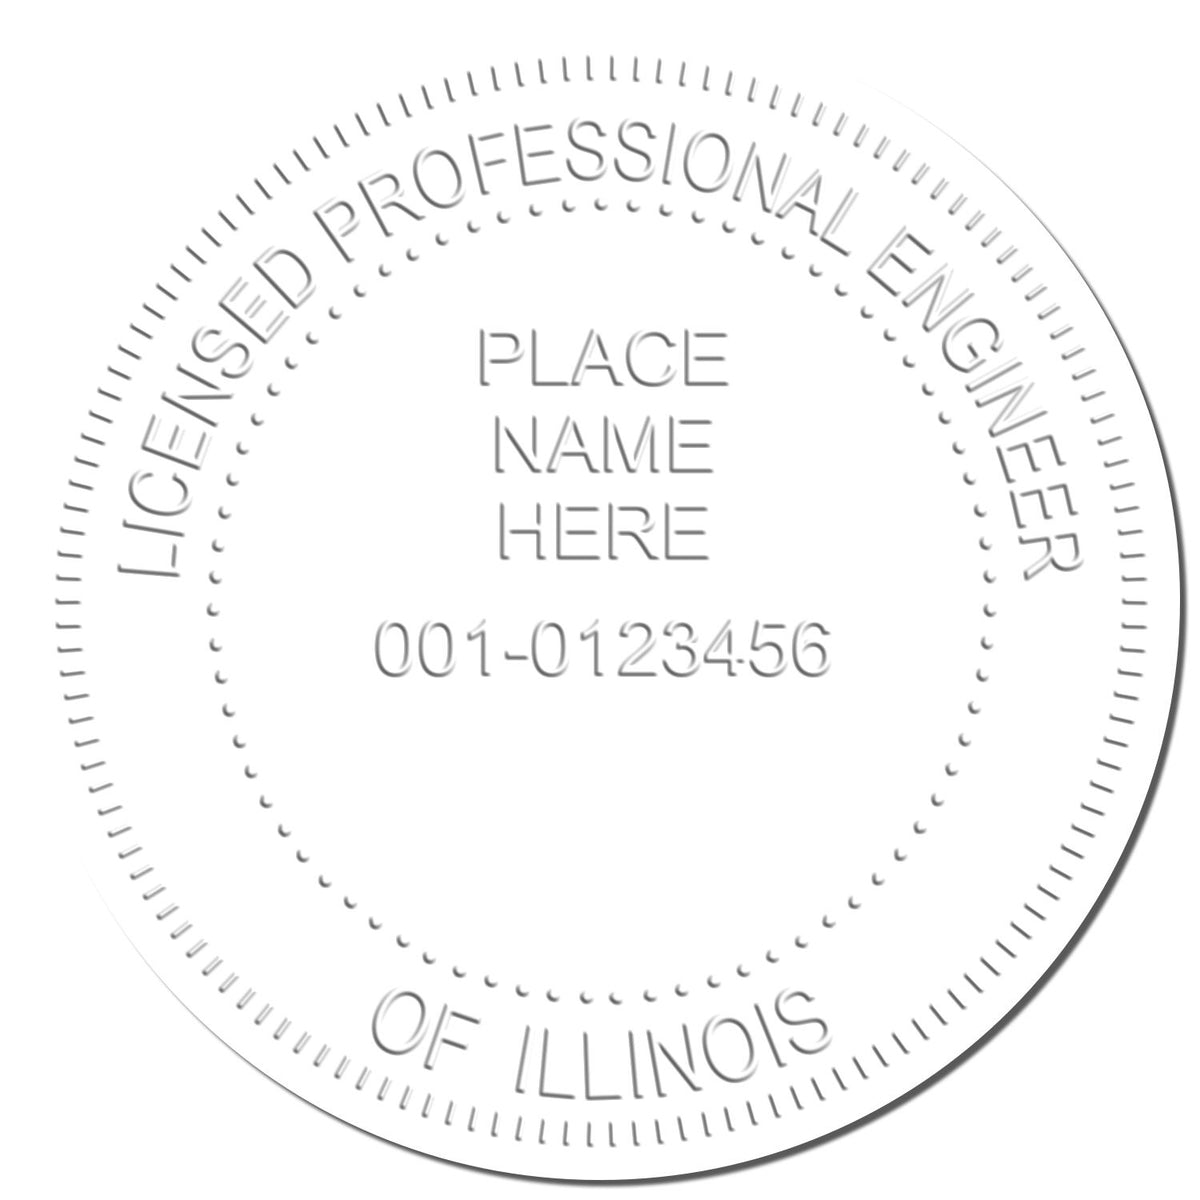 The Long Reach Illinois PE Seal stamp impression comes to life with a crisp, detailed photo on paper - showcasing true professional quality.